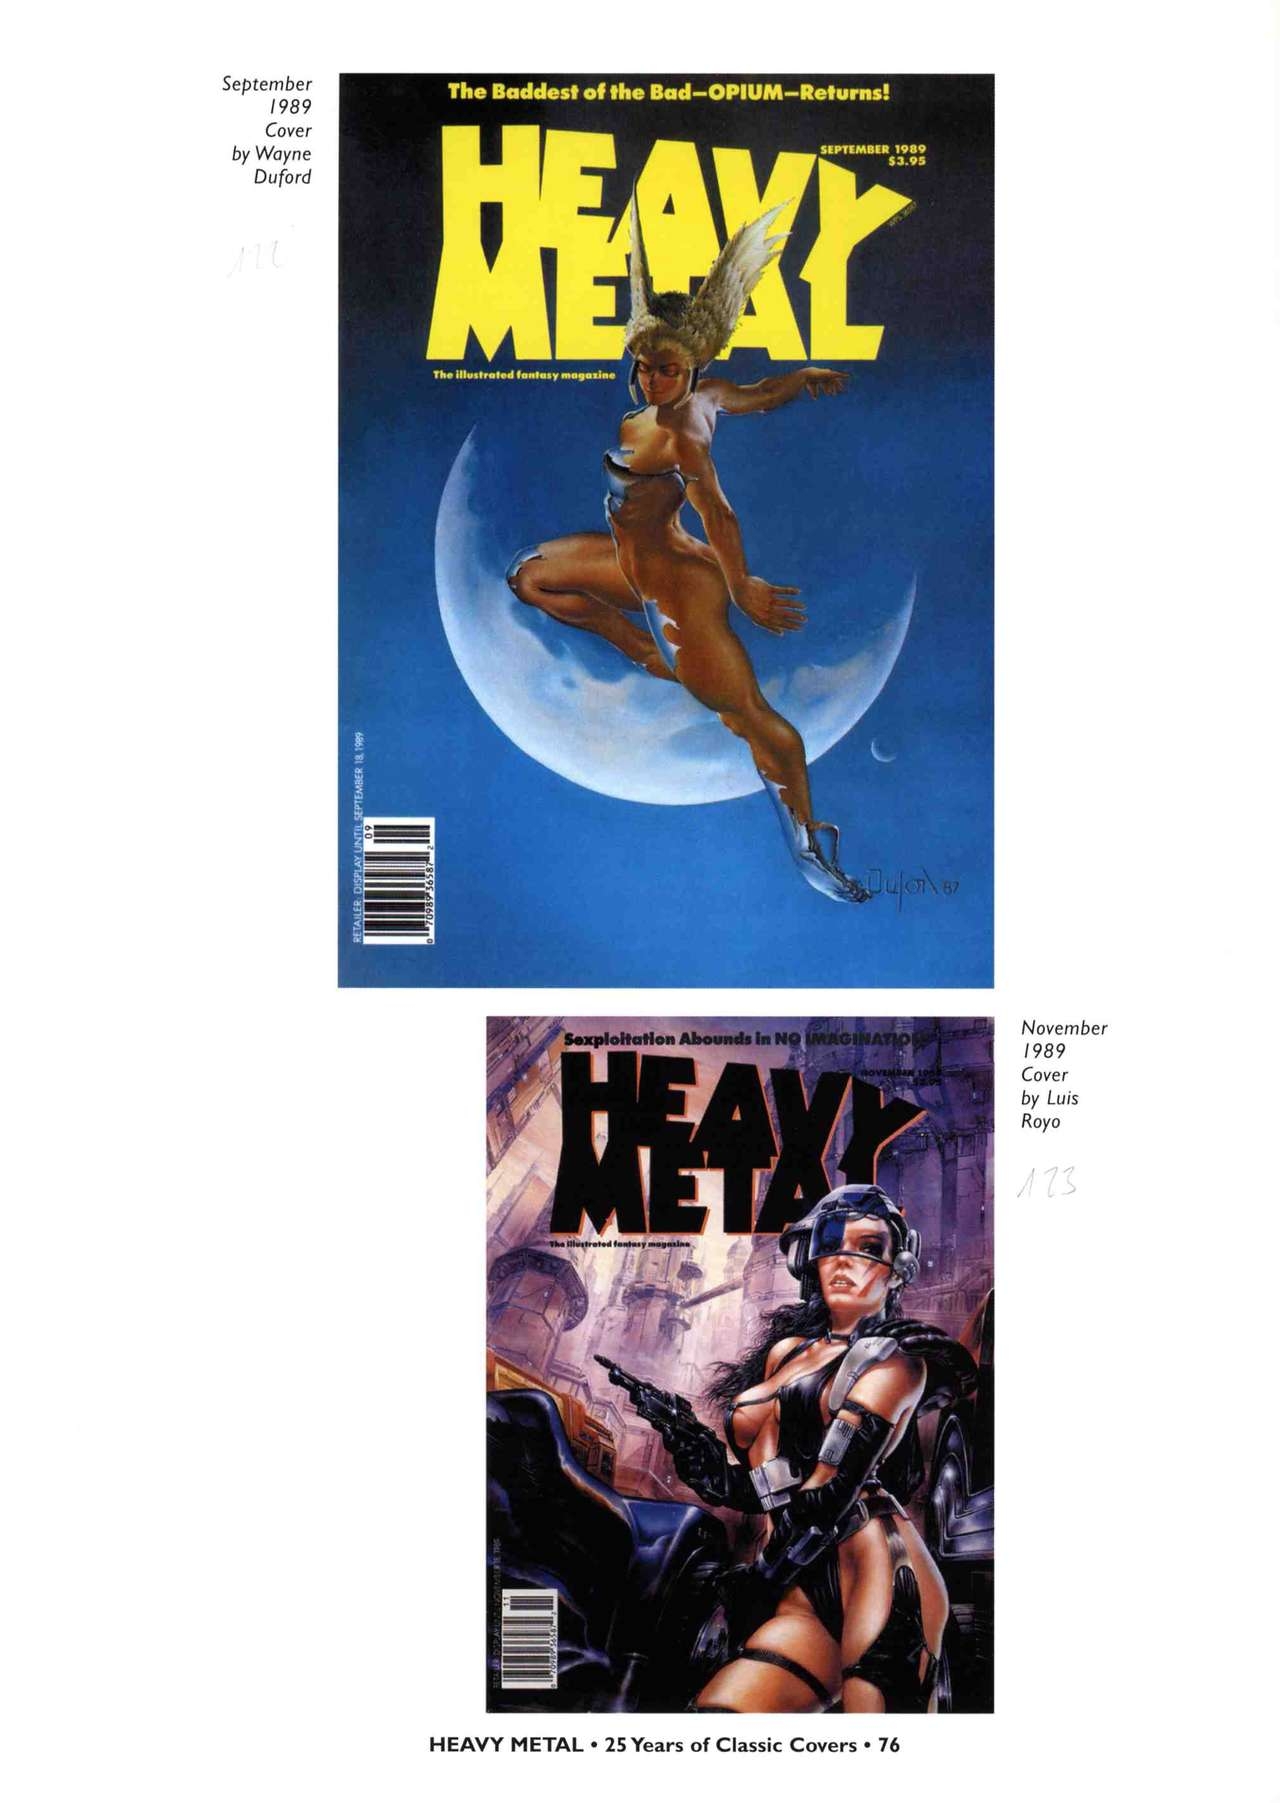 HEAVY METAL 25 Years of Classic Covers 81